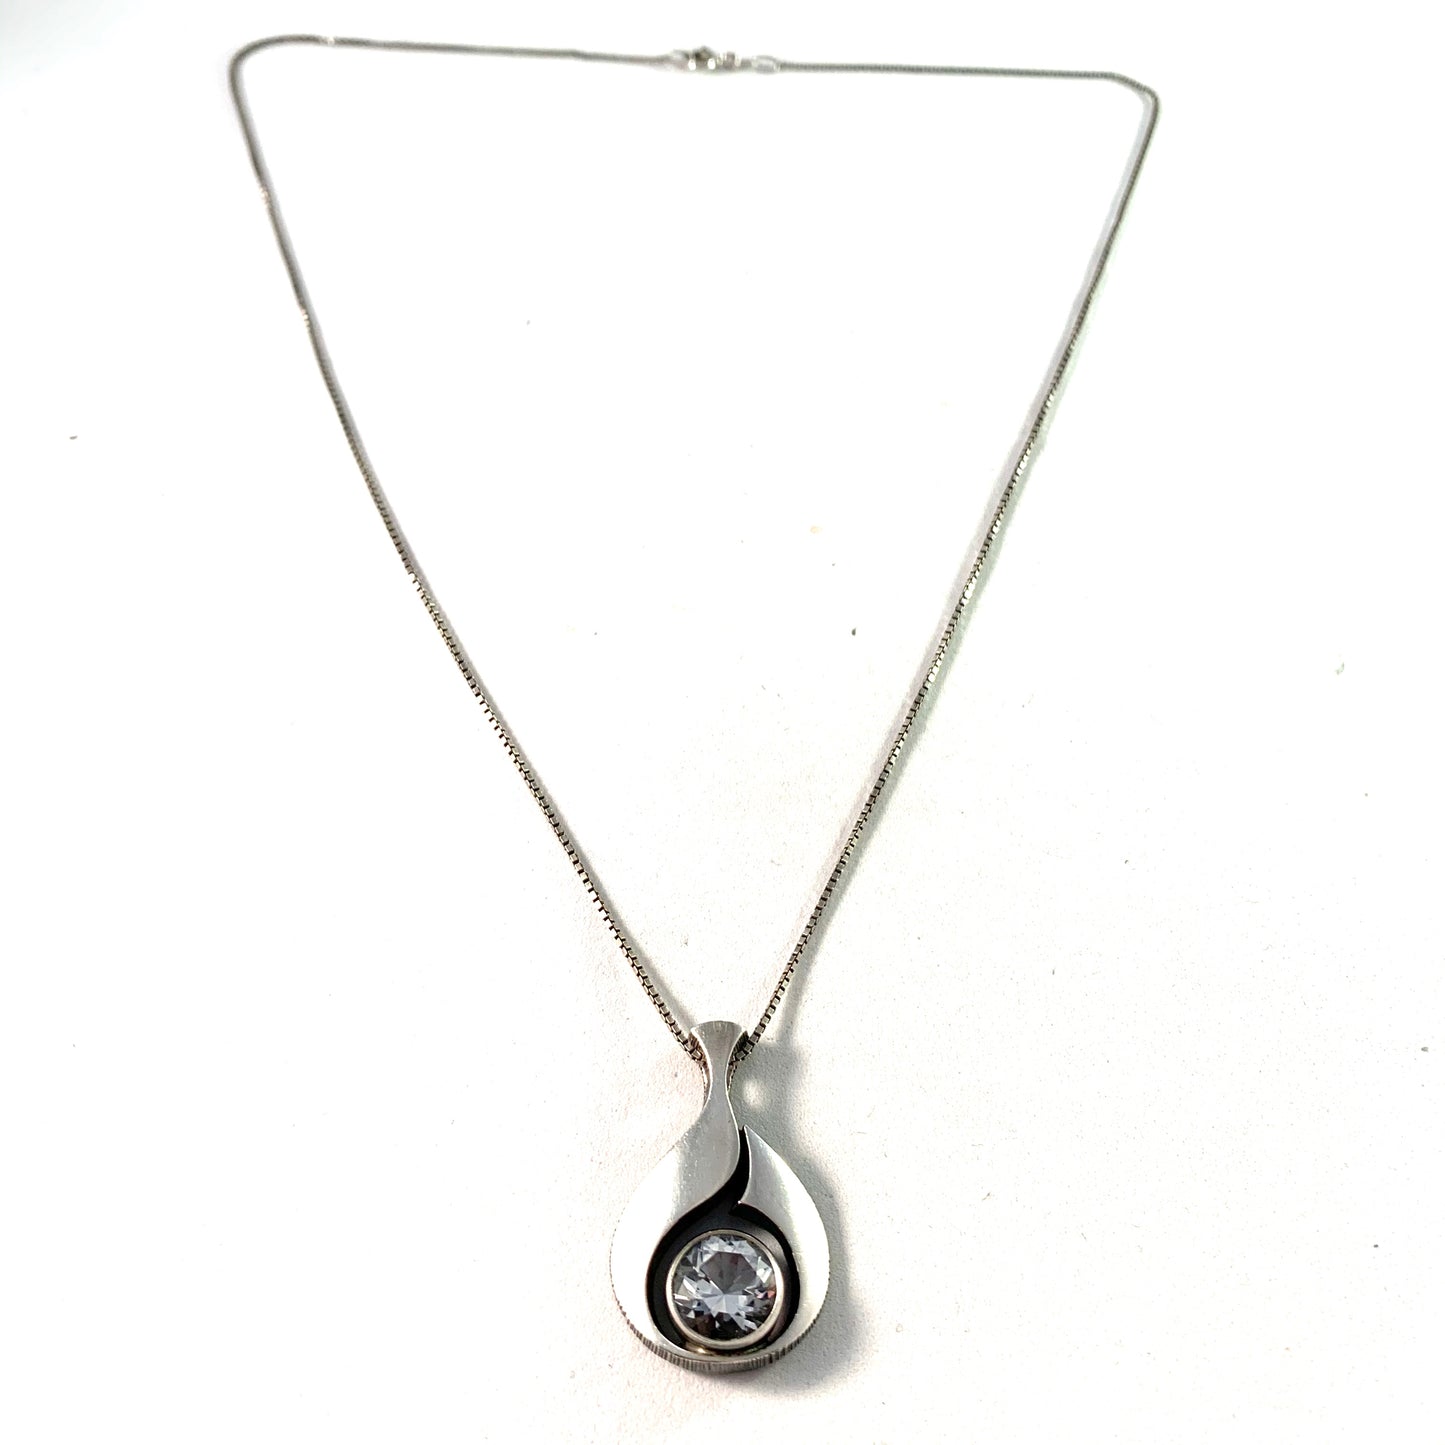 Karl Laine for Finnfeelings, Finland Vintage Sterling Silver Rock Crystal Pendant Necklace. Boxed.